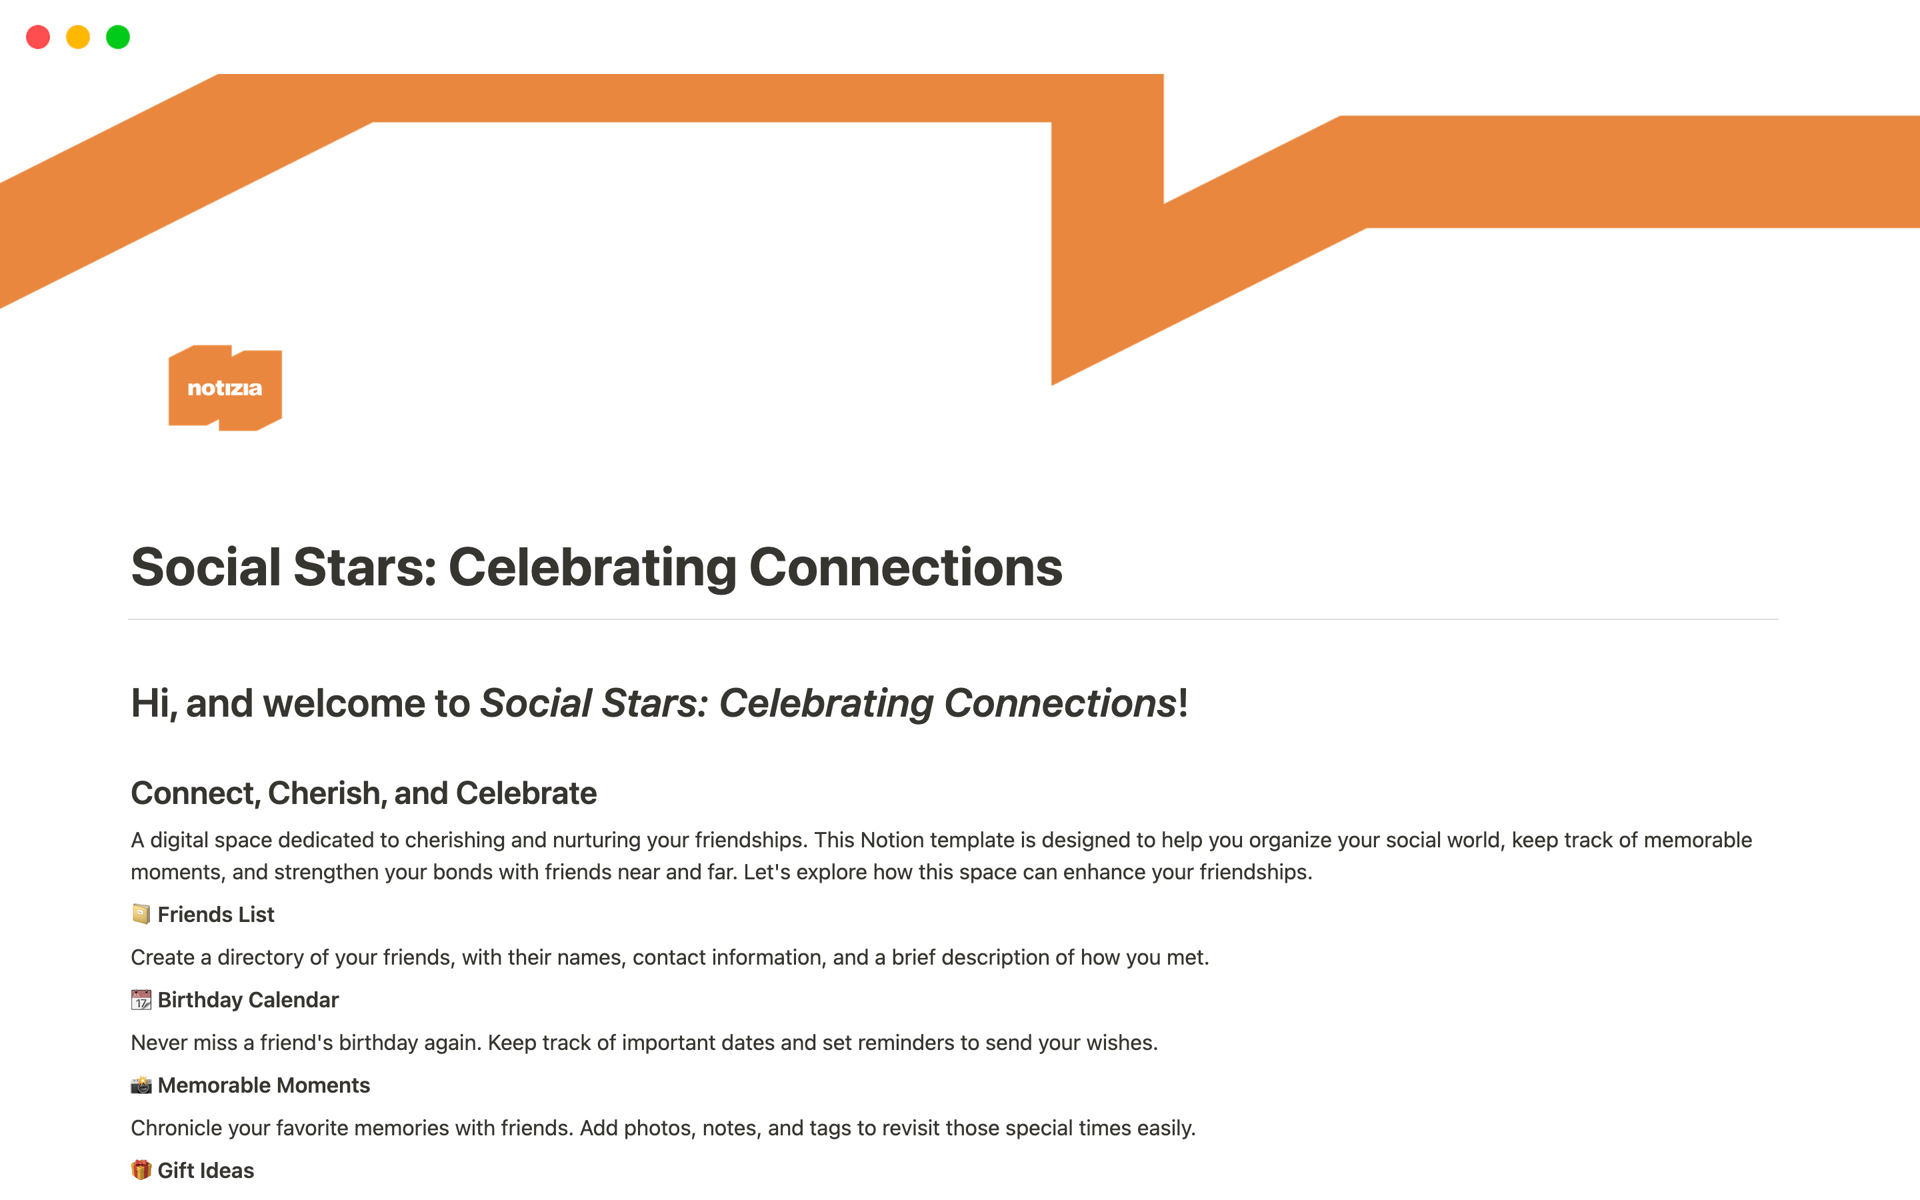 Social Stars is designed to create a directory of user's friends, set reminders for birthdays, keep their favorite memories, and a space to write heartfelt letters to their loved ones.